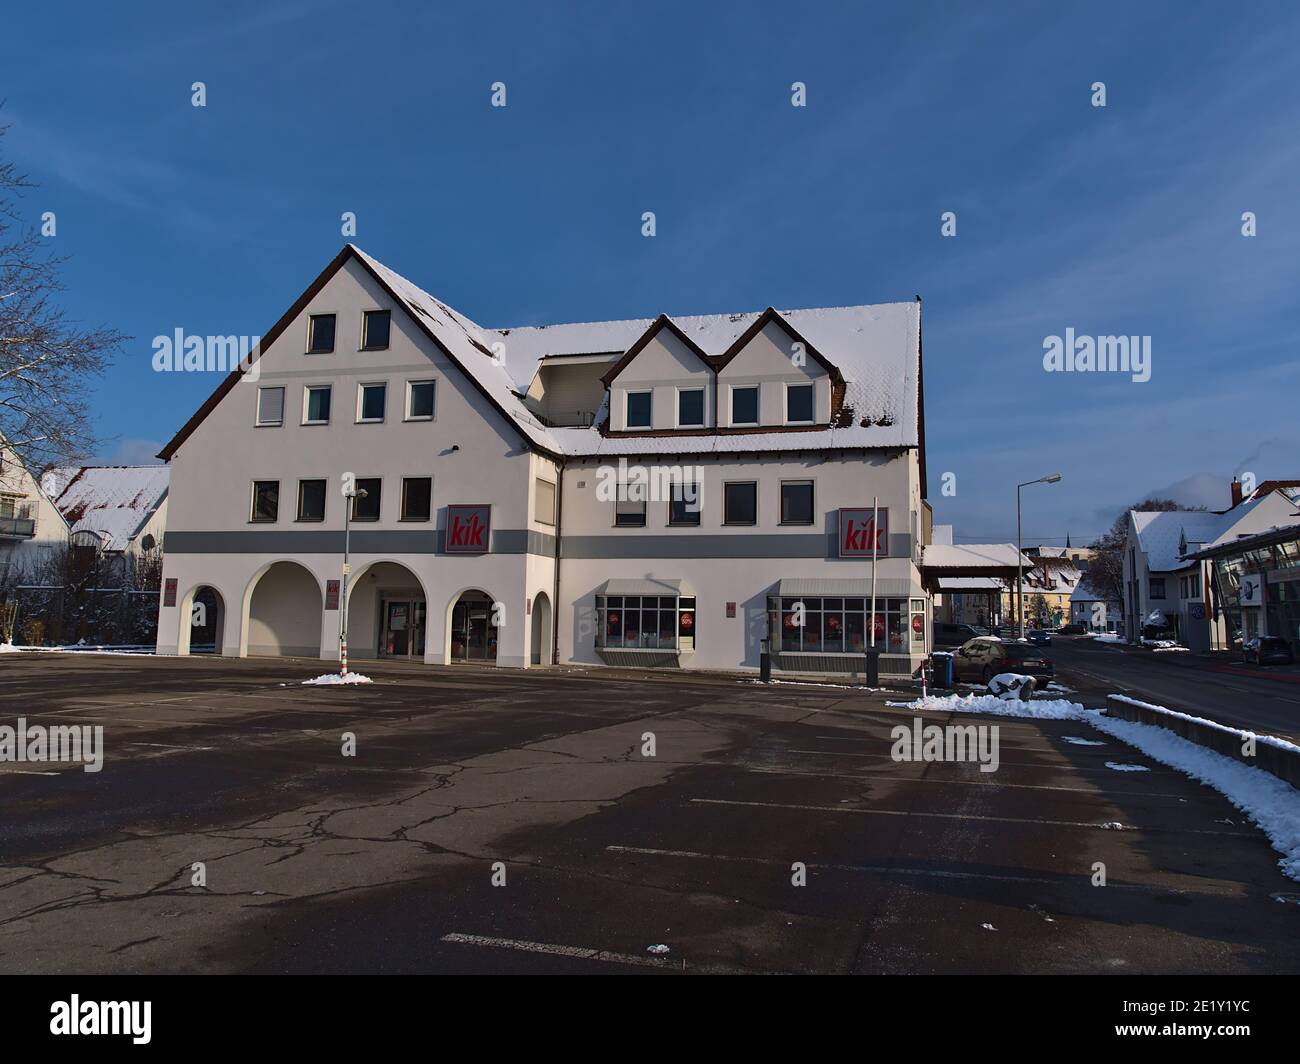 Sigmaringen, Germany - 01-09-2021: Clothing store of German retail textile discount shopping chain KiK with red company logo and parking lot. Stock Photo